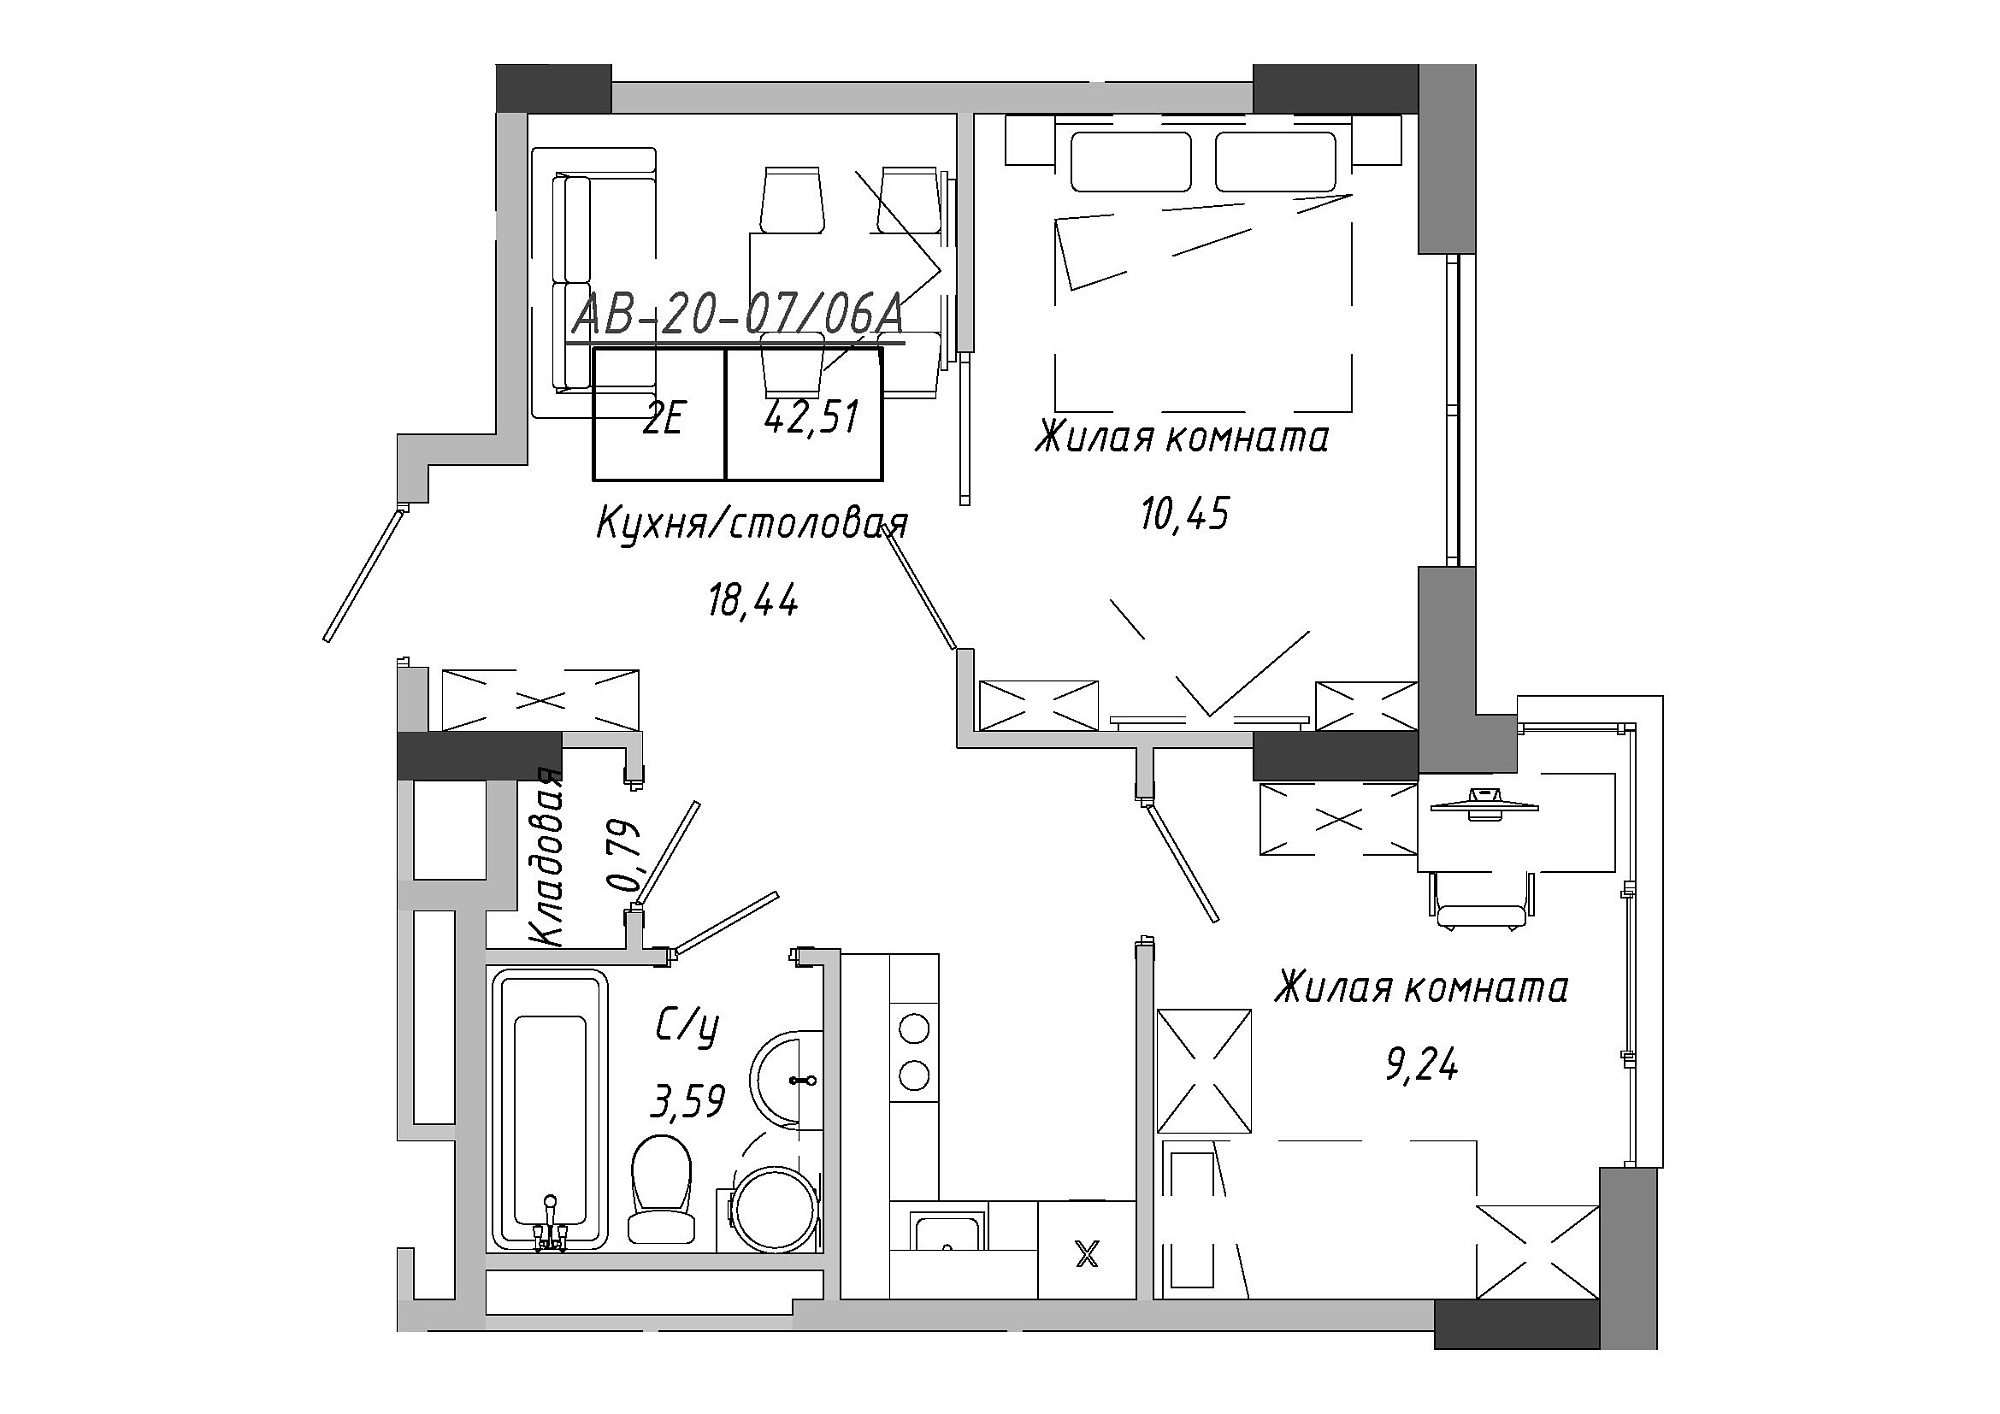 Planning 2-rm flats area 42.85m2, AB-20-07/0006а.